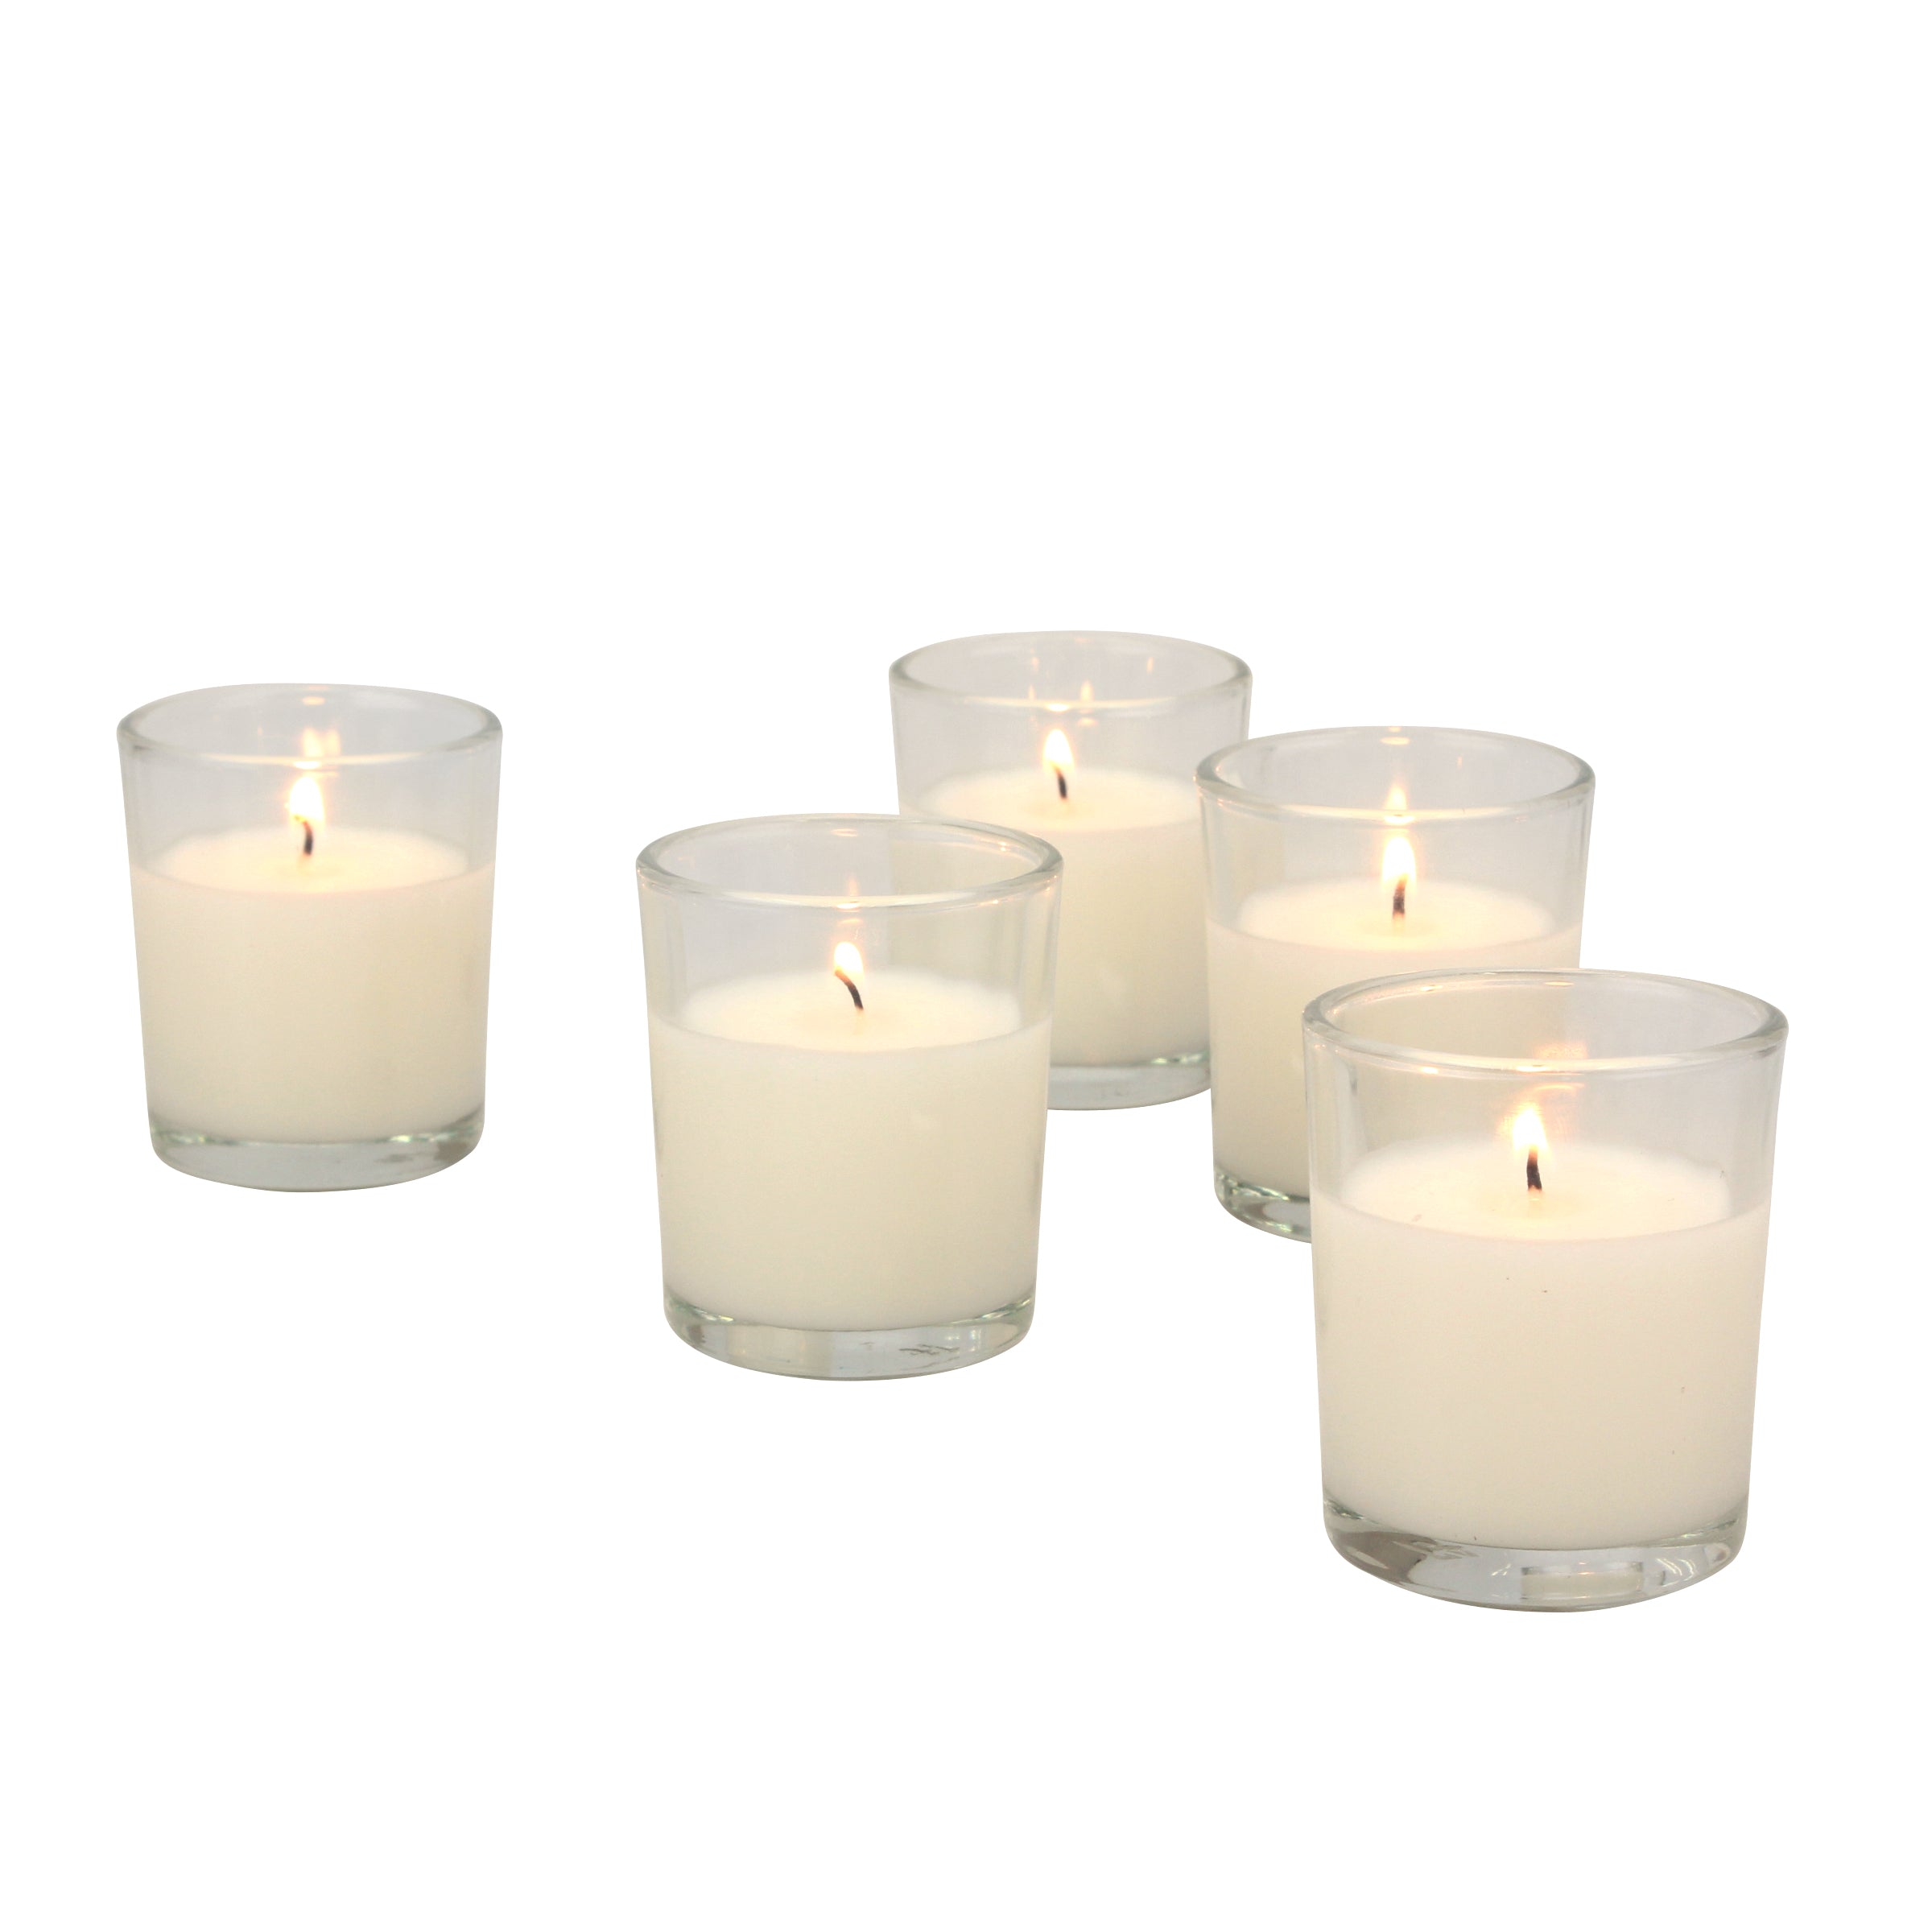 Stonebriar 48-Pack Unscented Long Burning Clear Glass Ivory Wax Filled Votive Candles